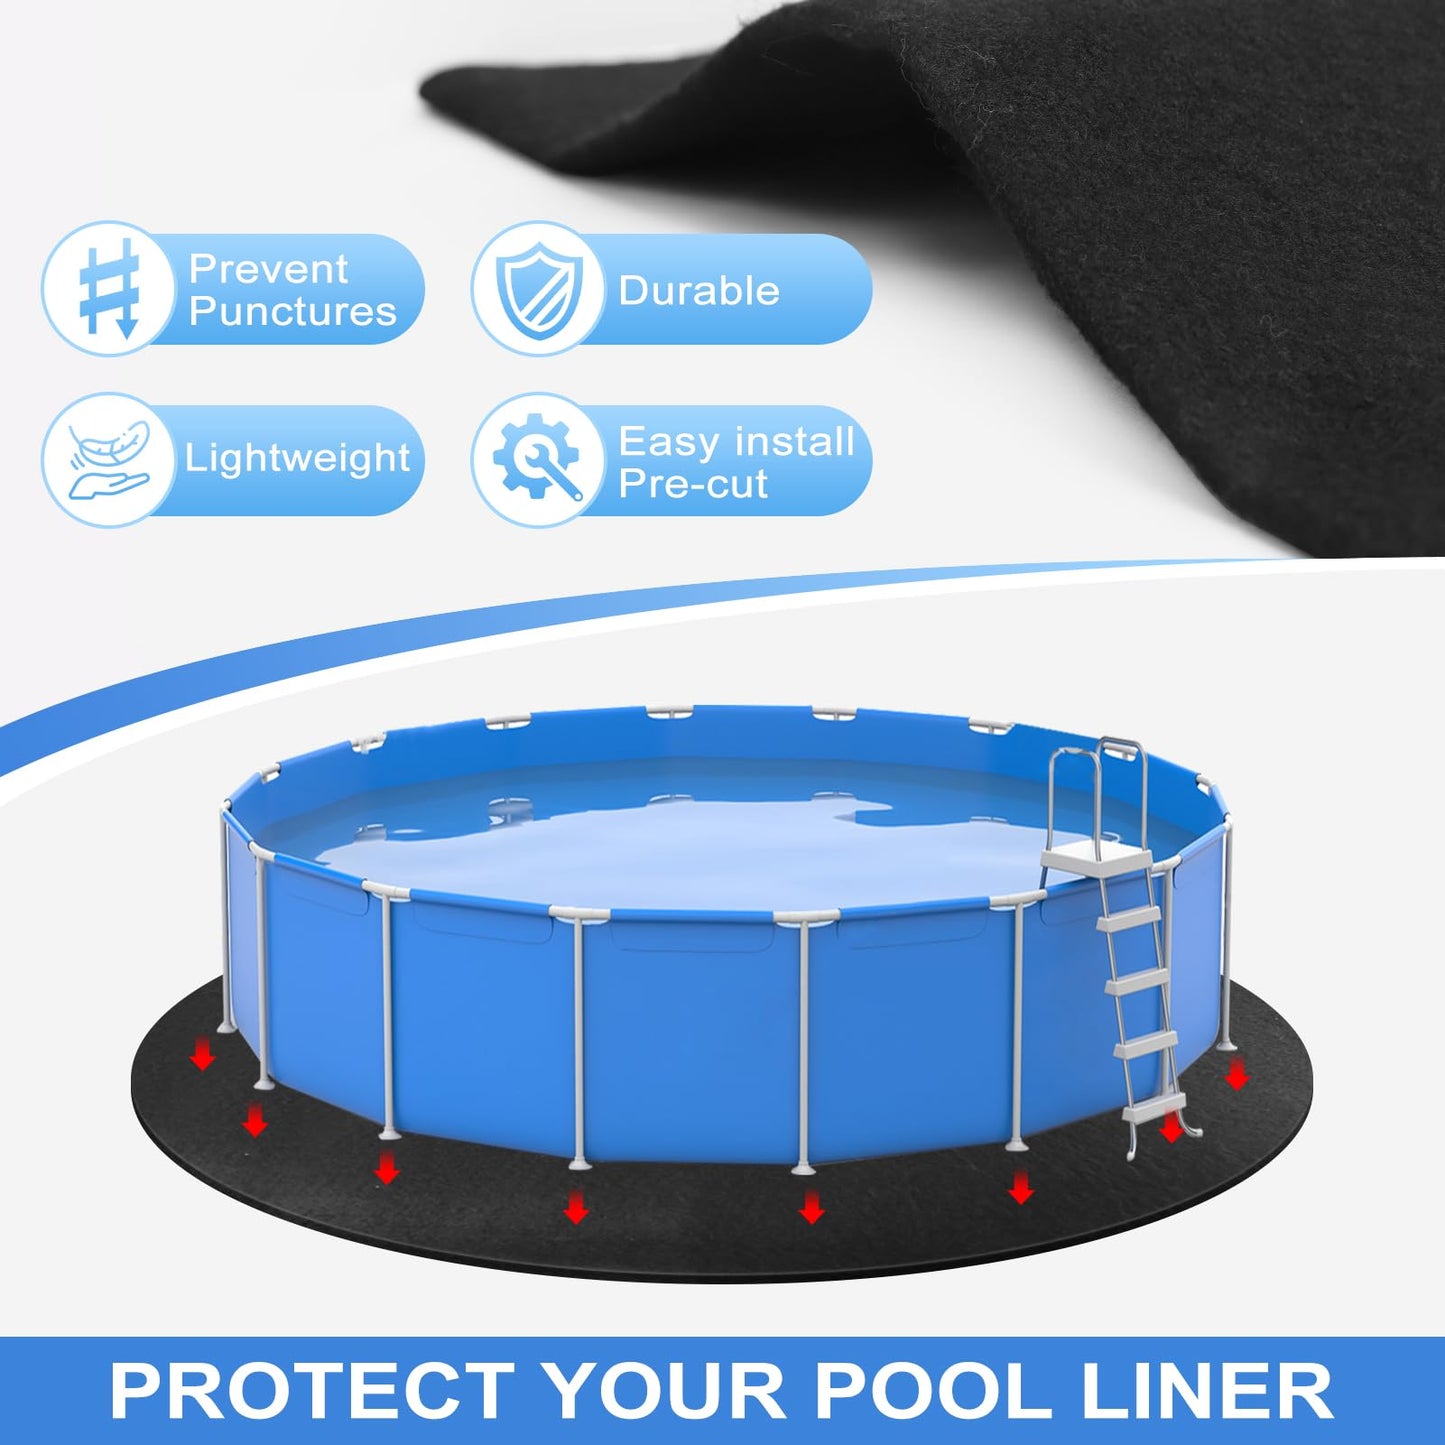 ACTREY 15 Ft Round Pool Liner Pad for Above Swimming Pools,Extends Life to The Liner|Easy to Install|Durable Eco-Friendly Material|Prevent Punctures for Hot Tub Above Ground Swimming Pool